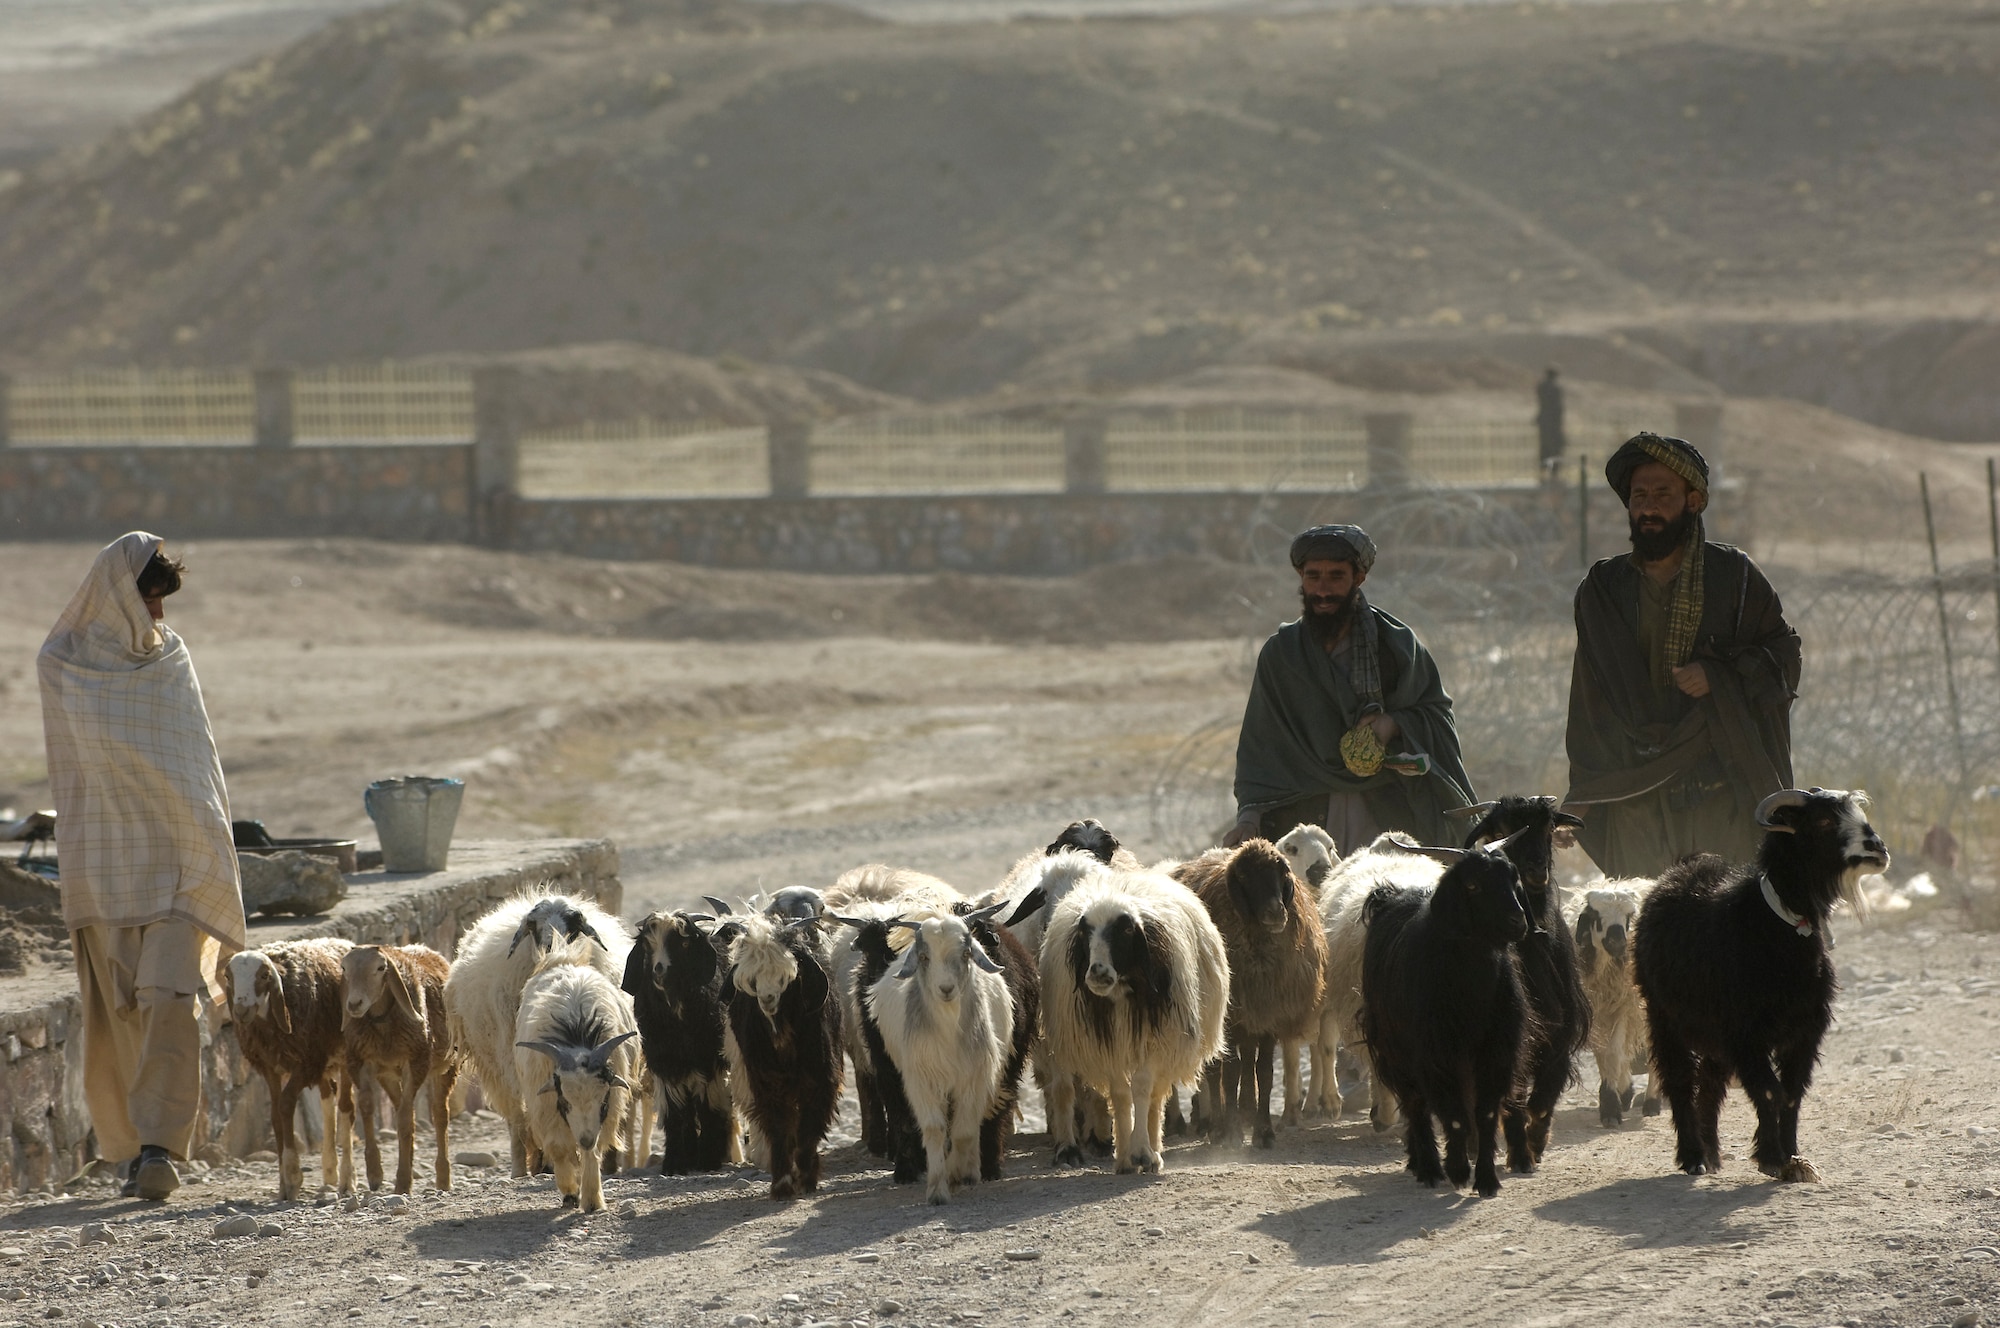 QALAT, Afghanistan -- Kuchi herders move their goats and sheep through the streets of Qalat toward a veterinary medical outreach conducted by the Zabul Provincial Reconstruction Team. The PRT members offered free deworming and vitamin supplements during the VMO. (U.S. Air Force photo/Master Sgt. Keith Brown)